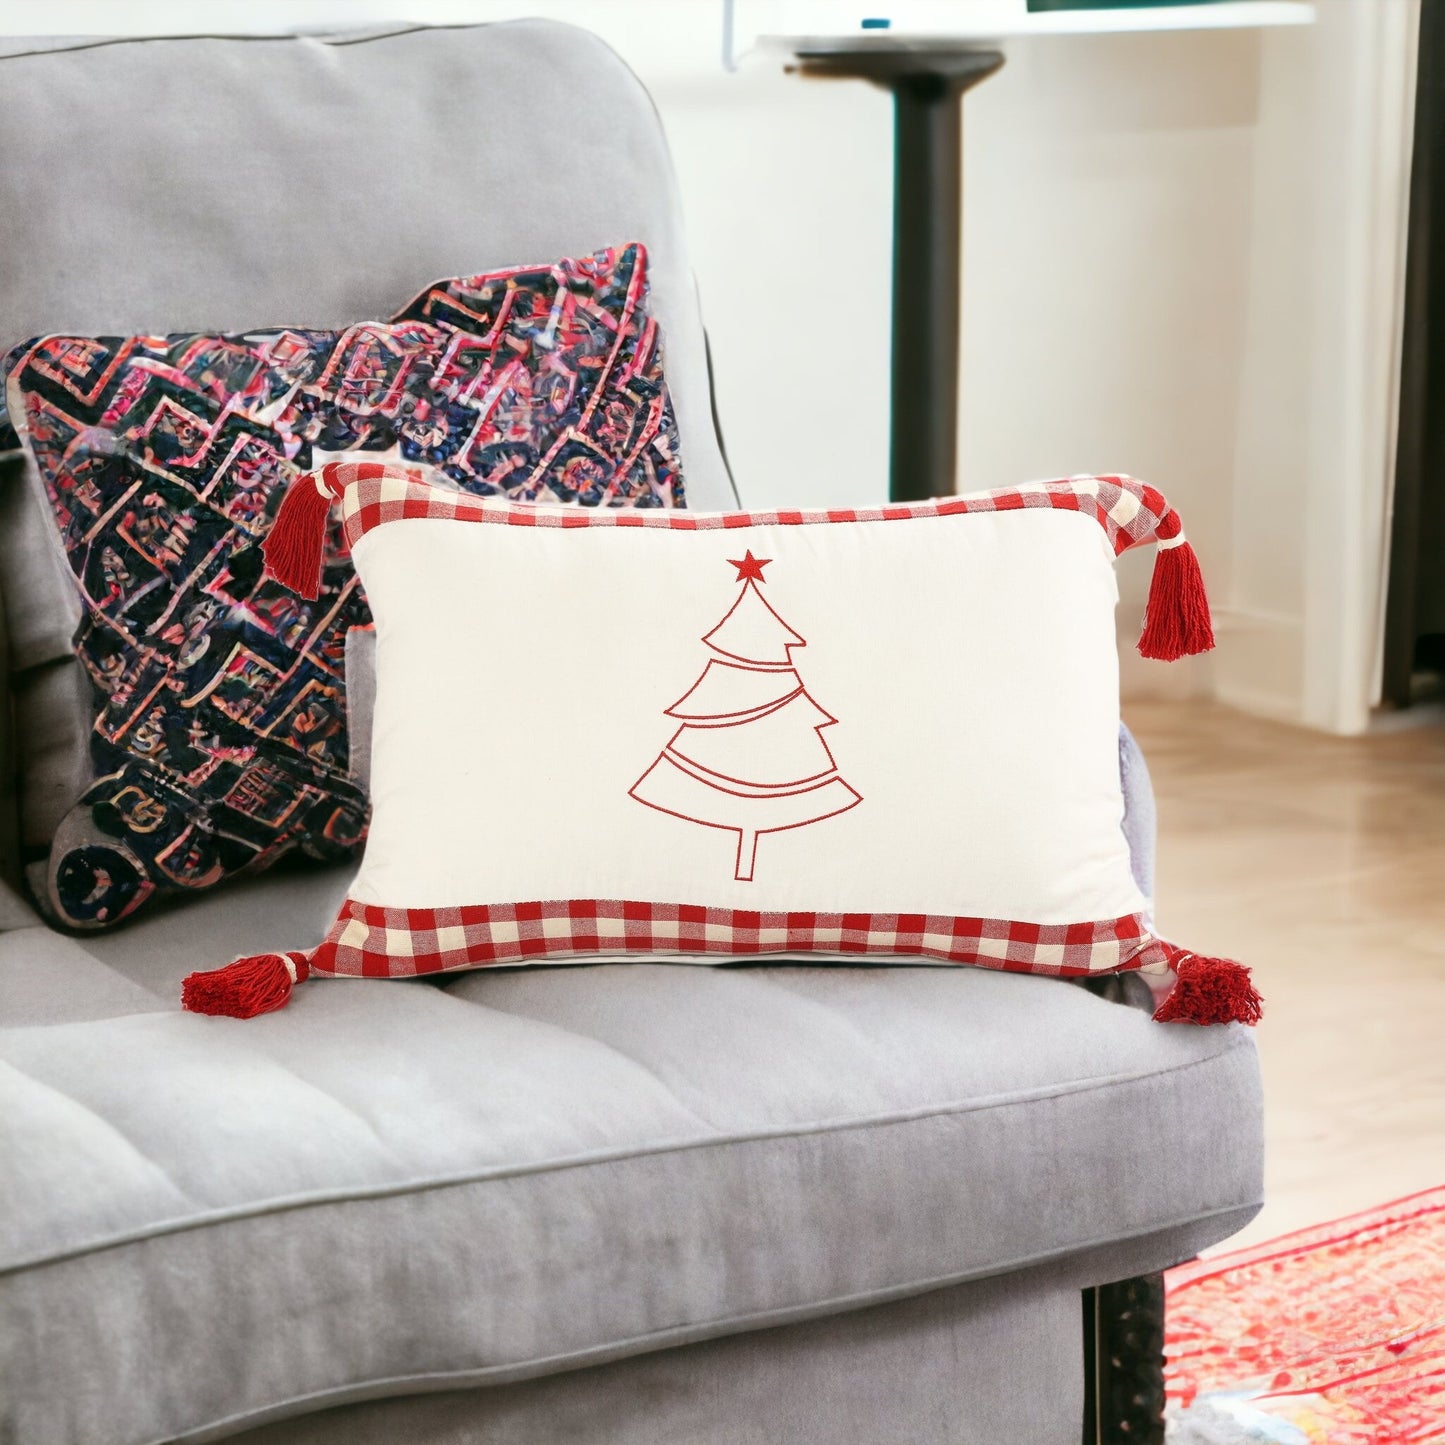 16" X 24" Red and White Christmas Tree Cotton Zippered Pillow With Tassels